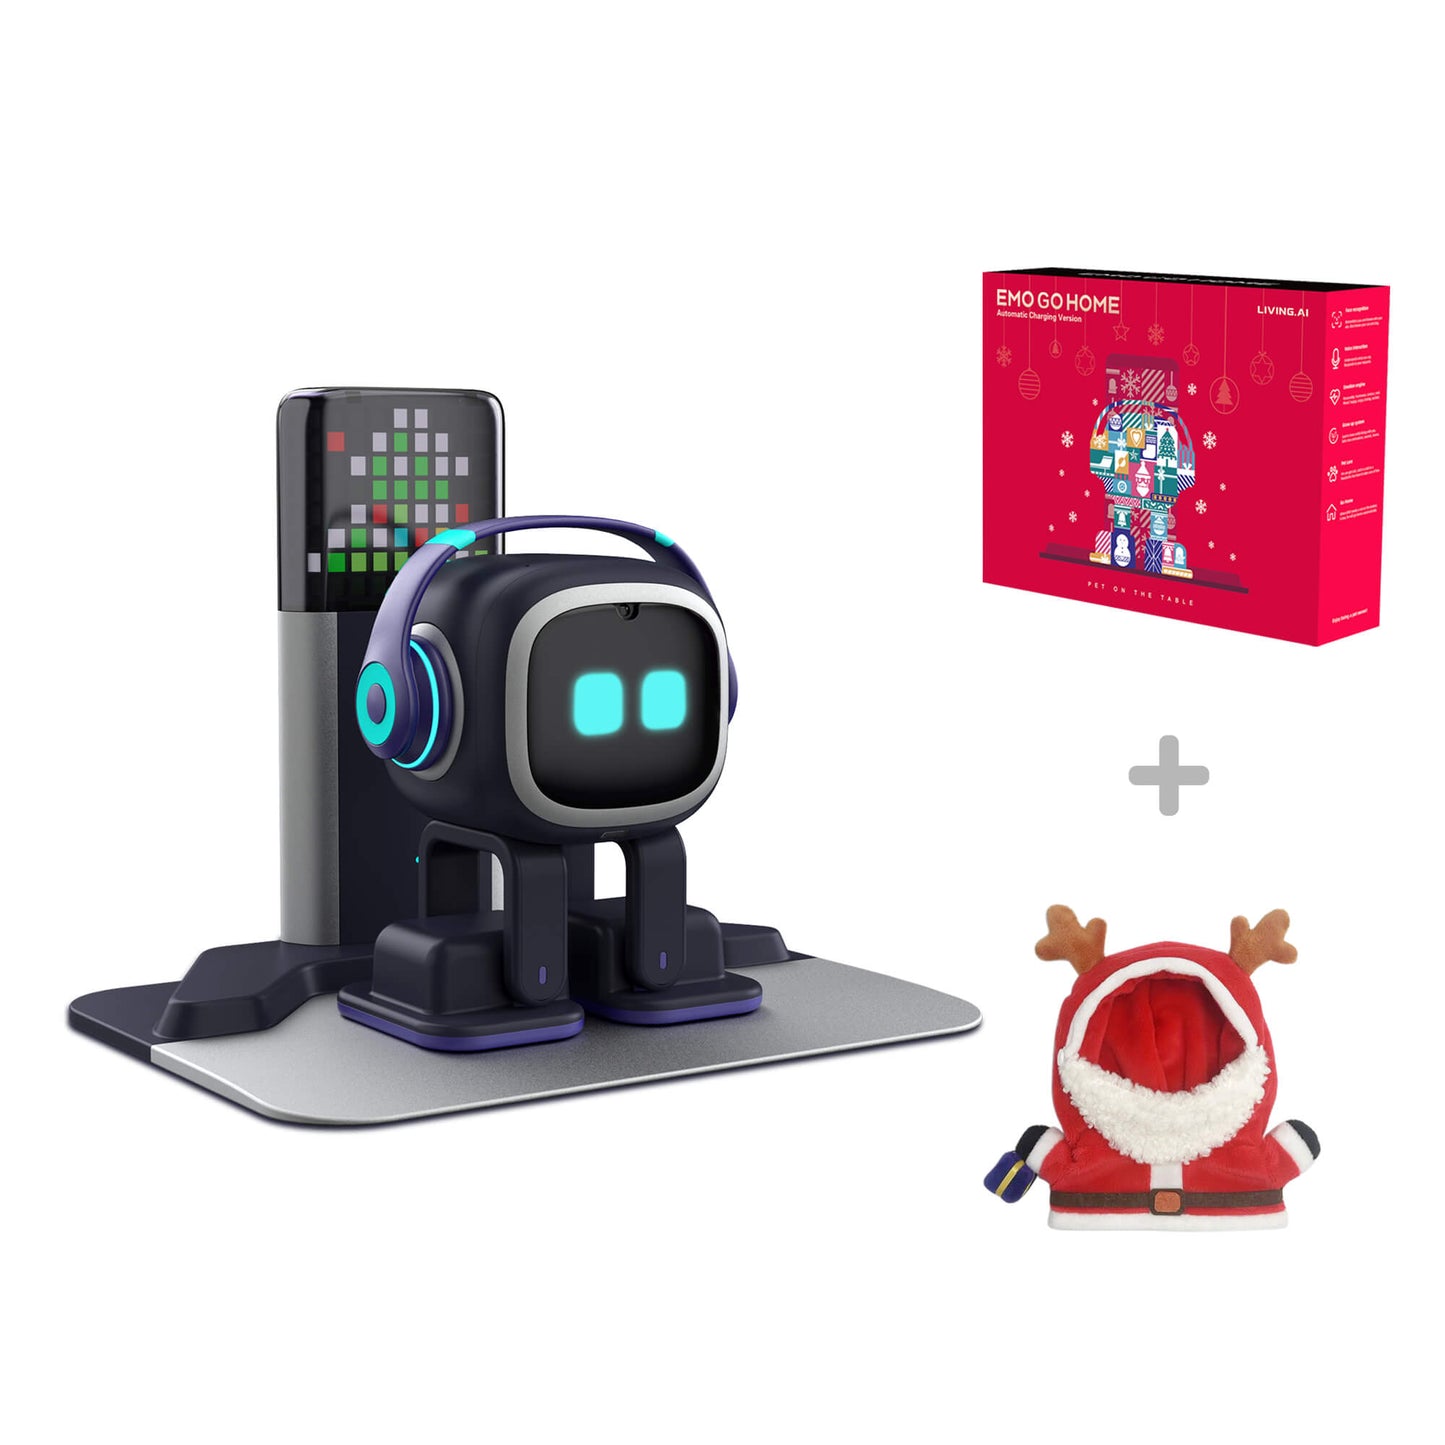 Quality and Comfort Replying to @suicique Emo AI Robot. Awesome desk pet to  interact, emo ai robot desktop pet 